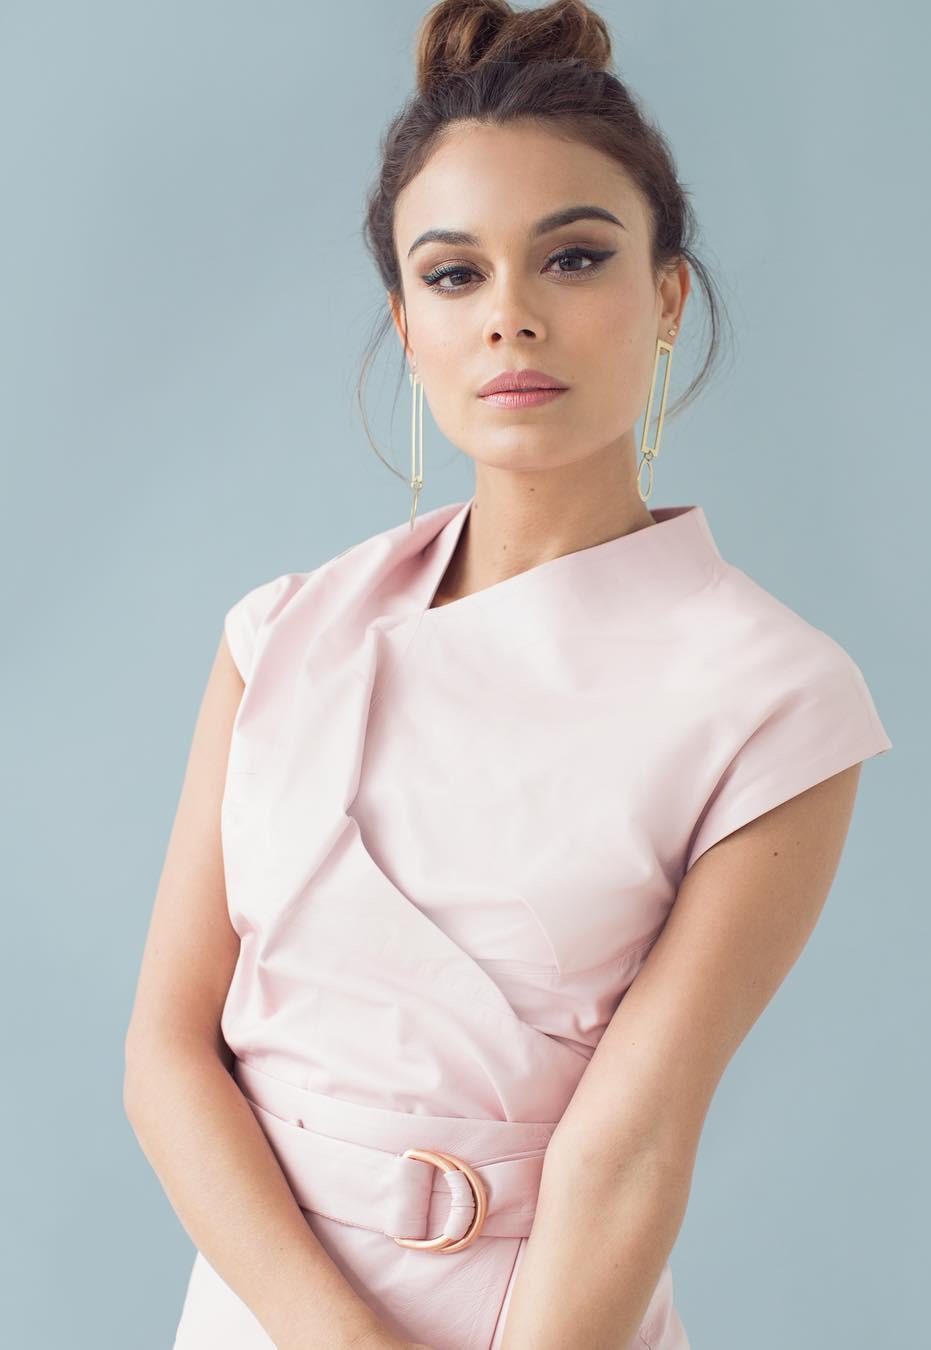 Nathalie Kelley Biography, Age, Height, Weight, Boyfriend, Family, and Career 